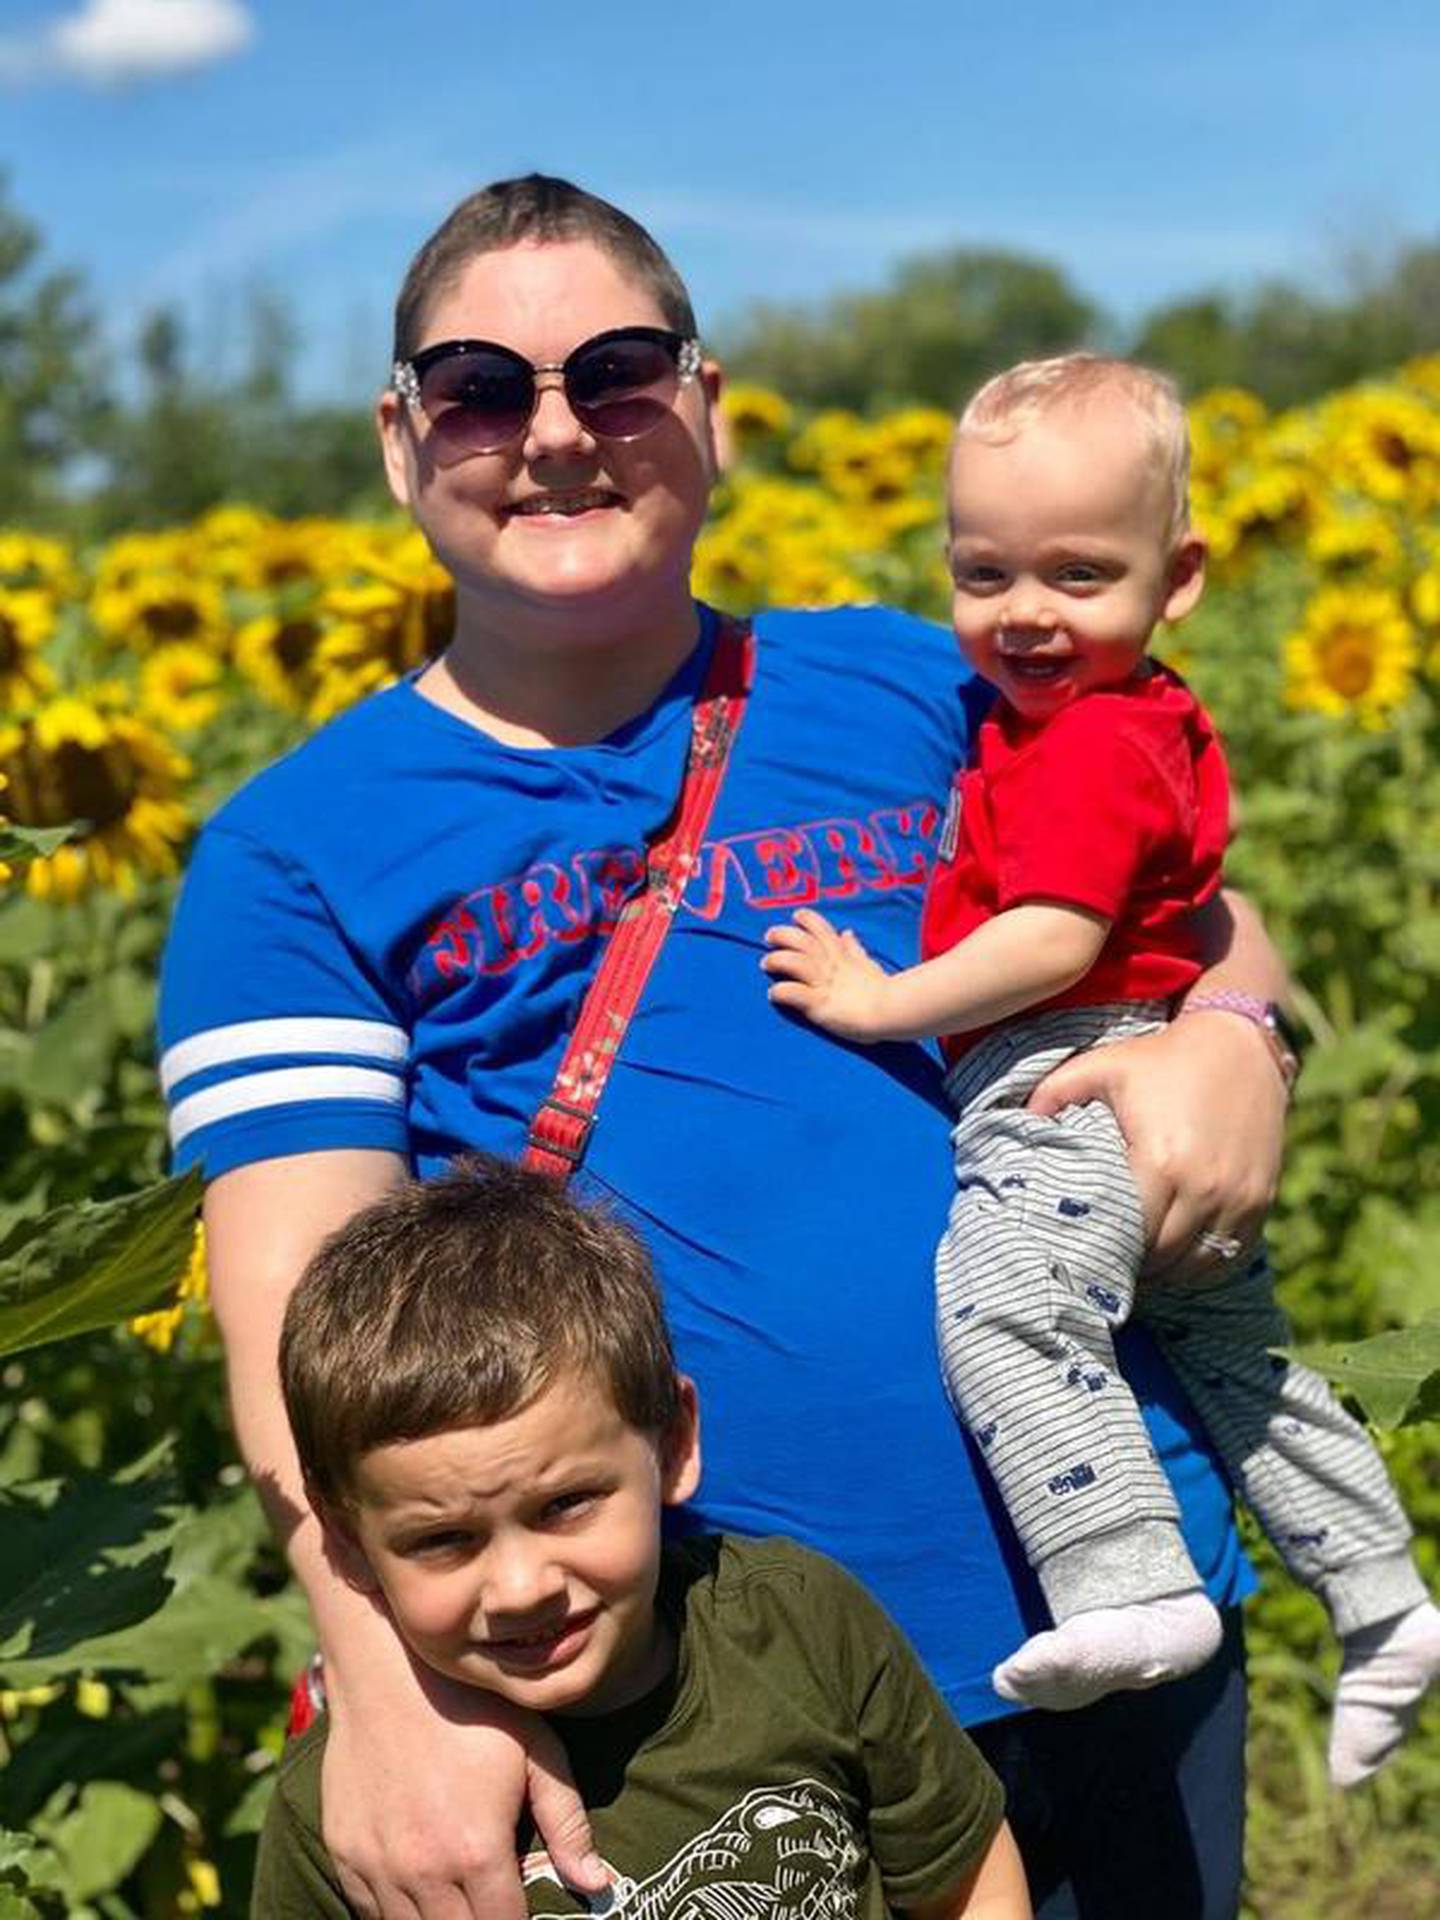 Chiara Robinette, 33, of Minooka, is pictured with her sons Richard, 5, and Henry. She is living in the moment and fighting stage 4 breast cancer with smiles and all her strength.